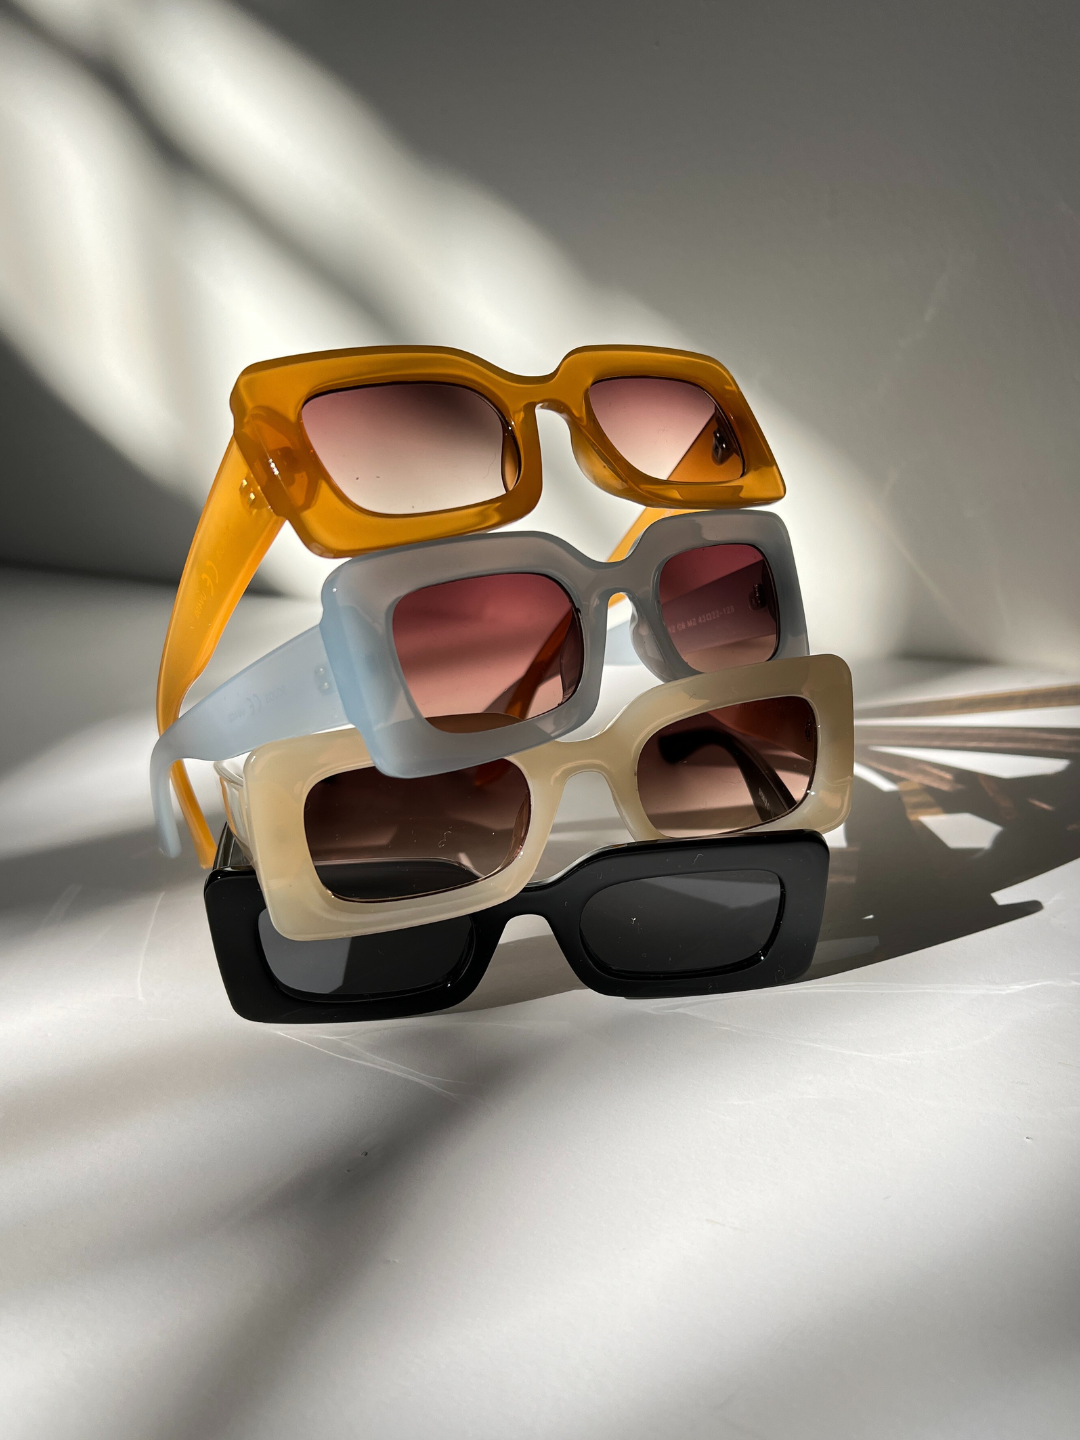 Orange | Group of kids rectangle sunglasses, stacked on top of each other, in orange, blue, orange, cream, and black, on a white background.